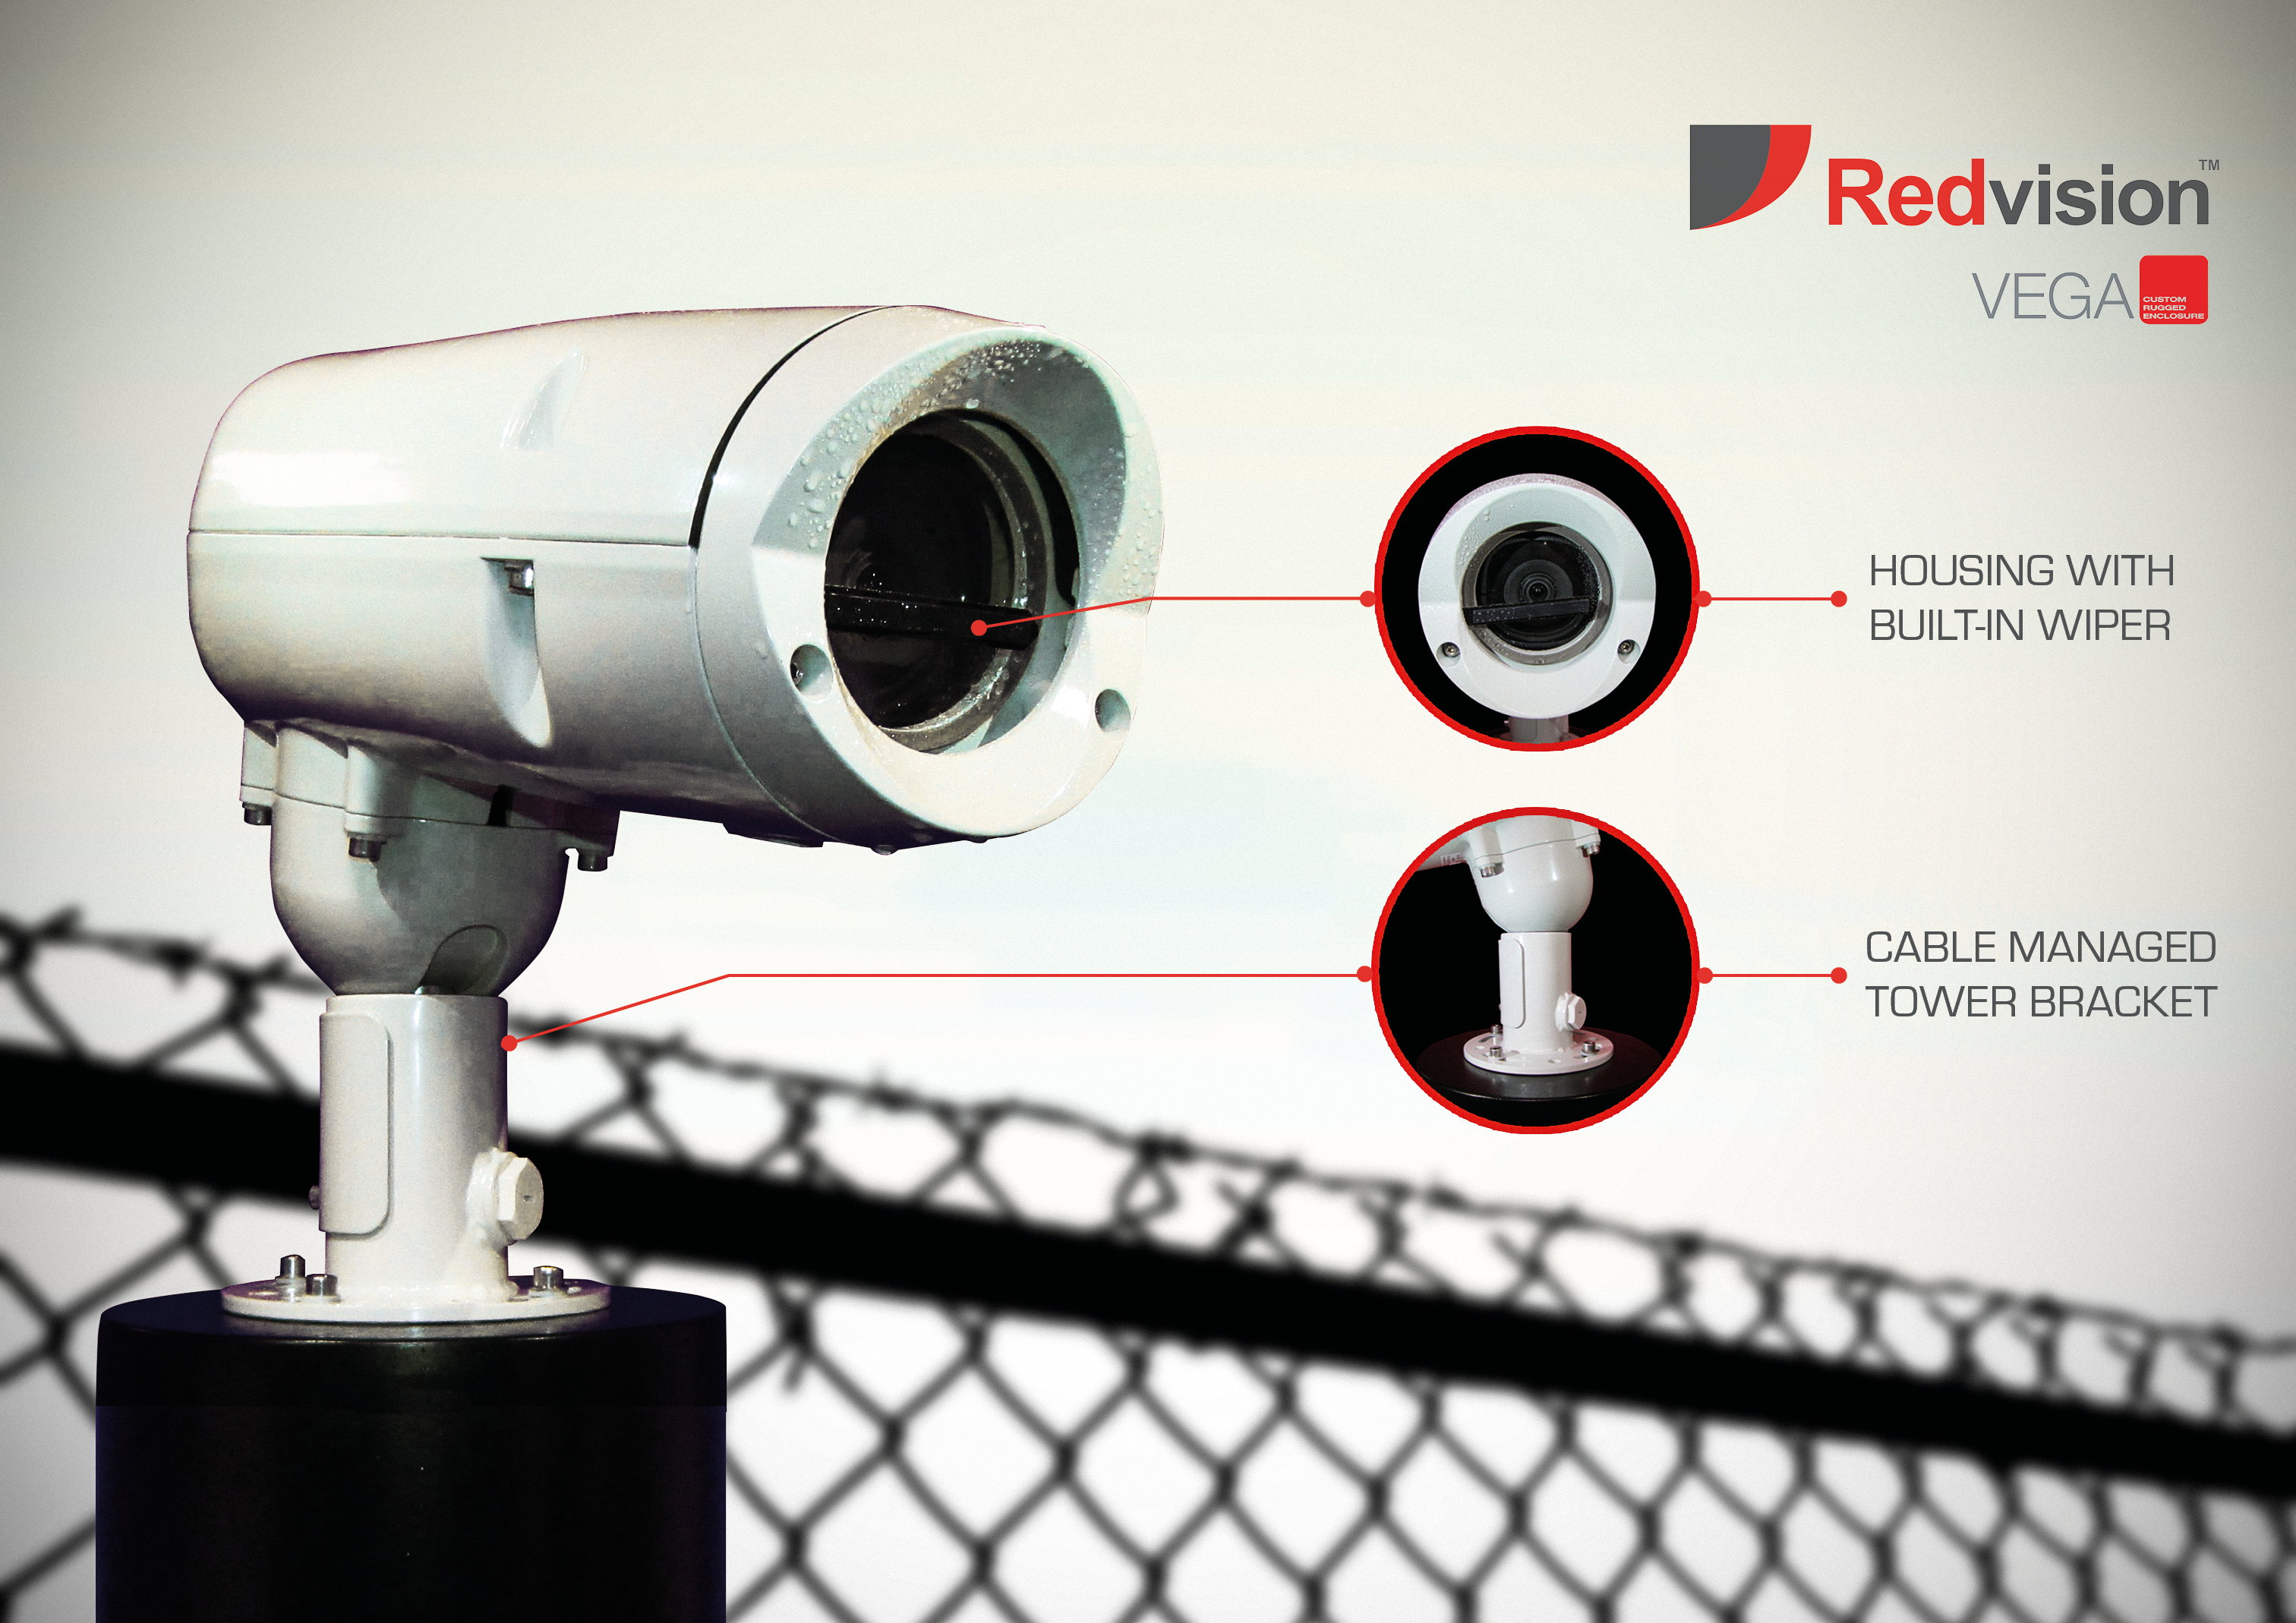 I can see clearly now the rain has gone – thanks to the wiper on Redvision’s VEGA™ 2010 rugged housing!